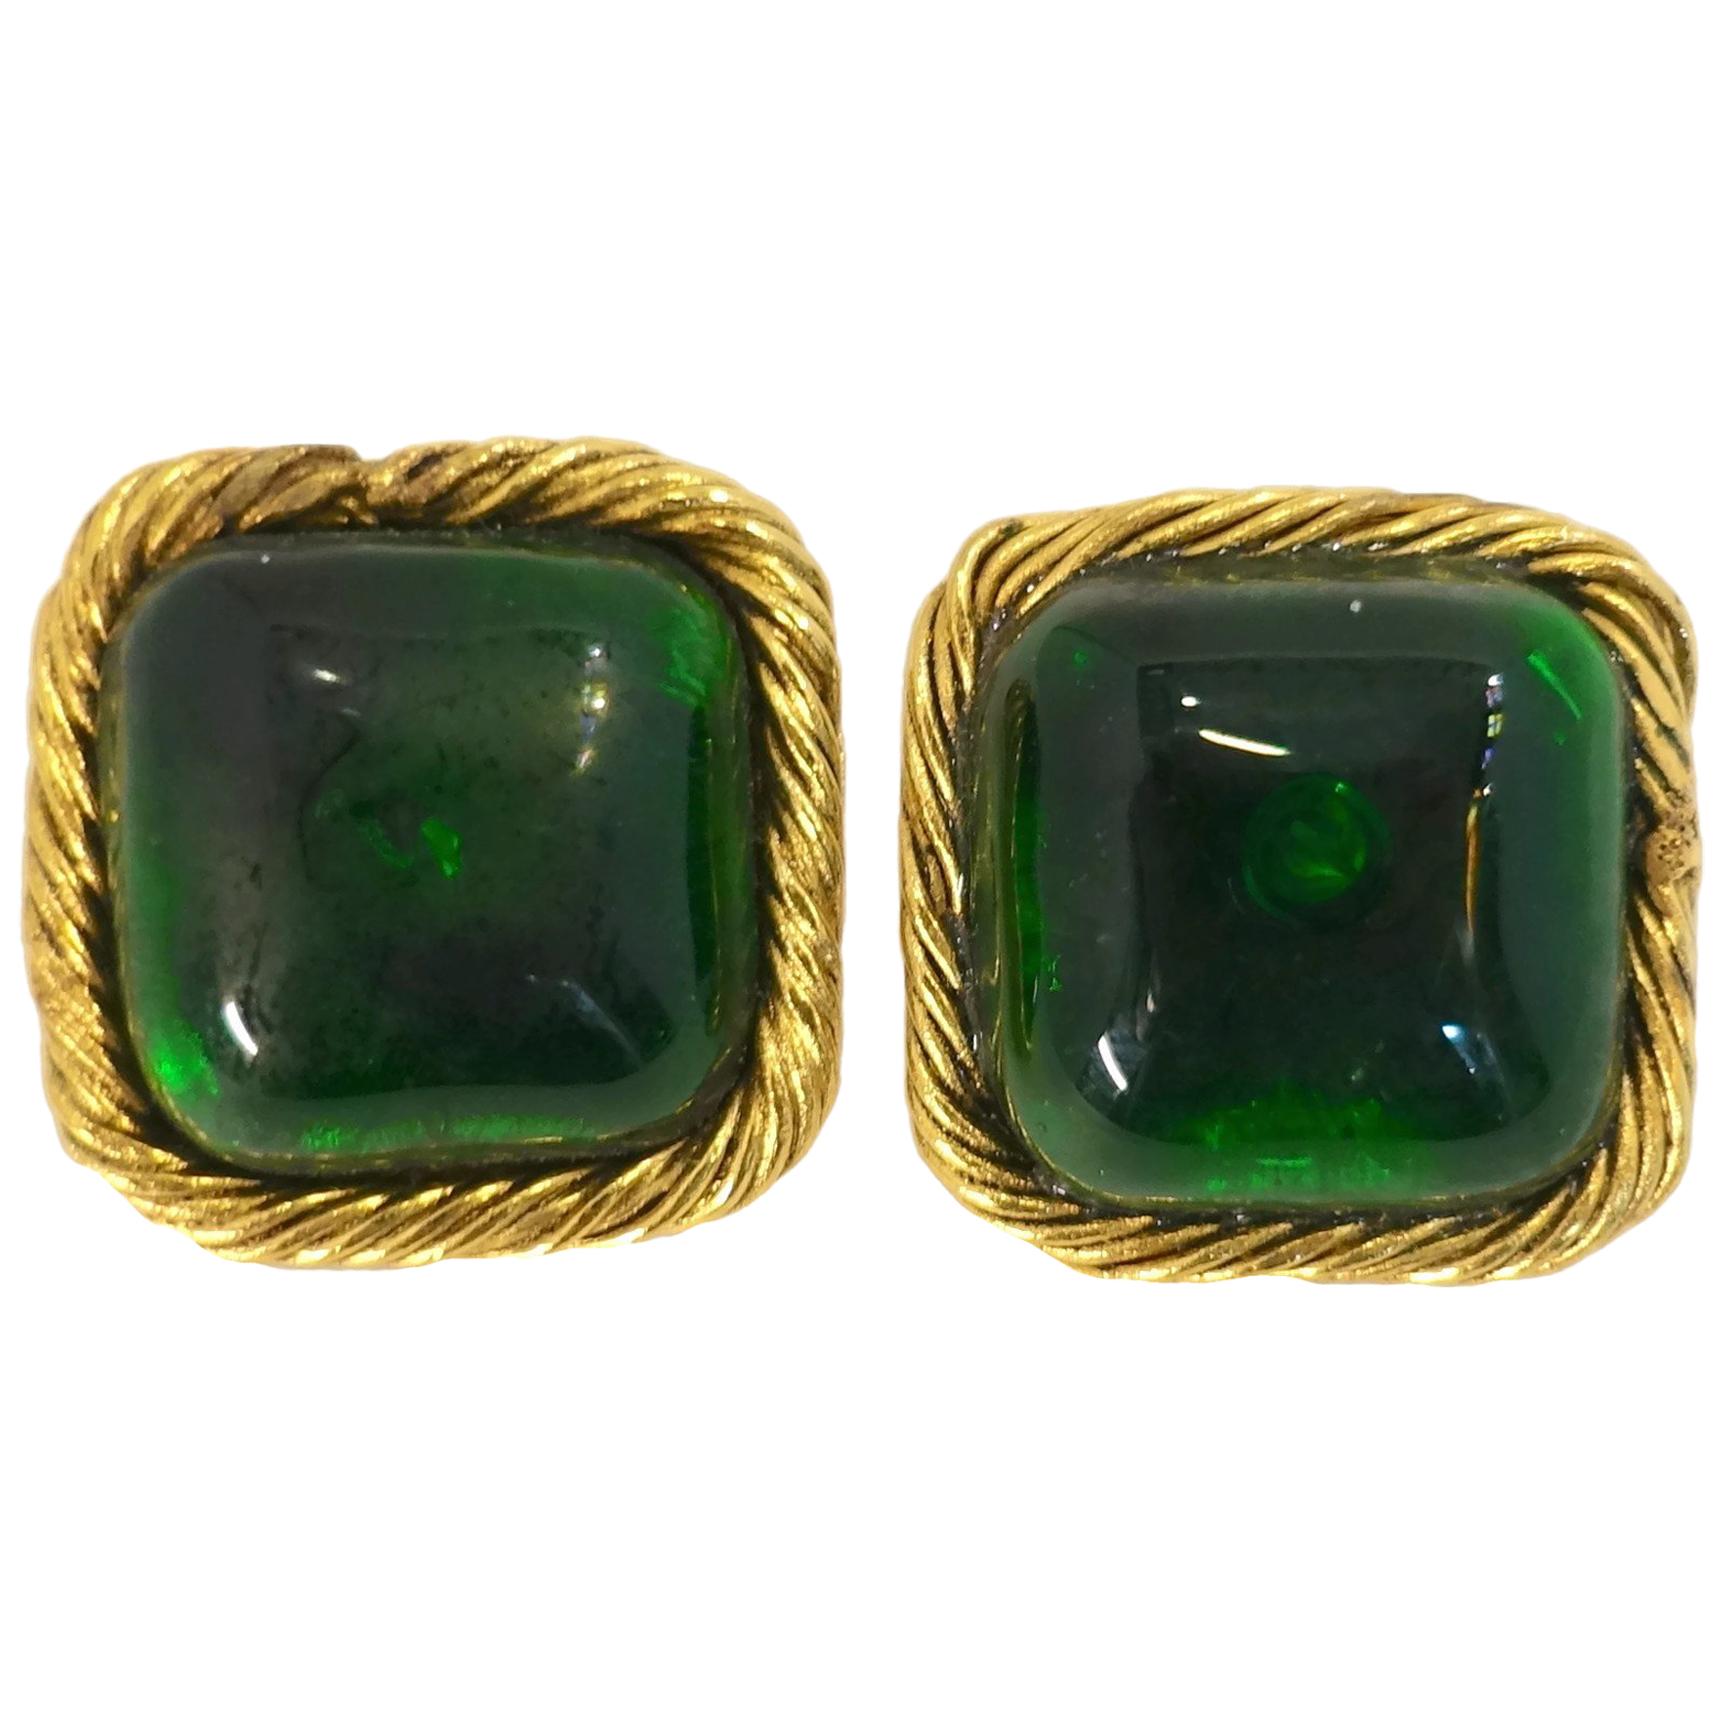 Vintage Signed Chanel 23 Emerald Gripoix Glass Earrings